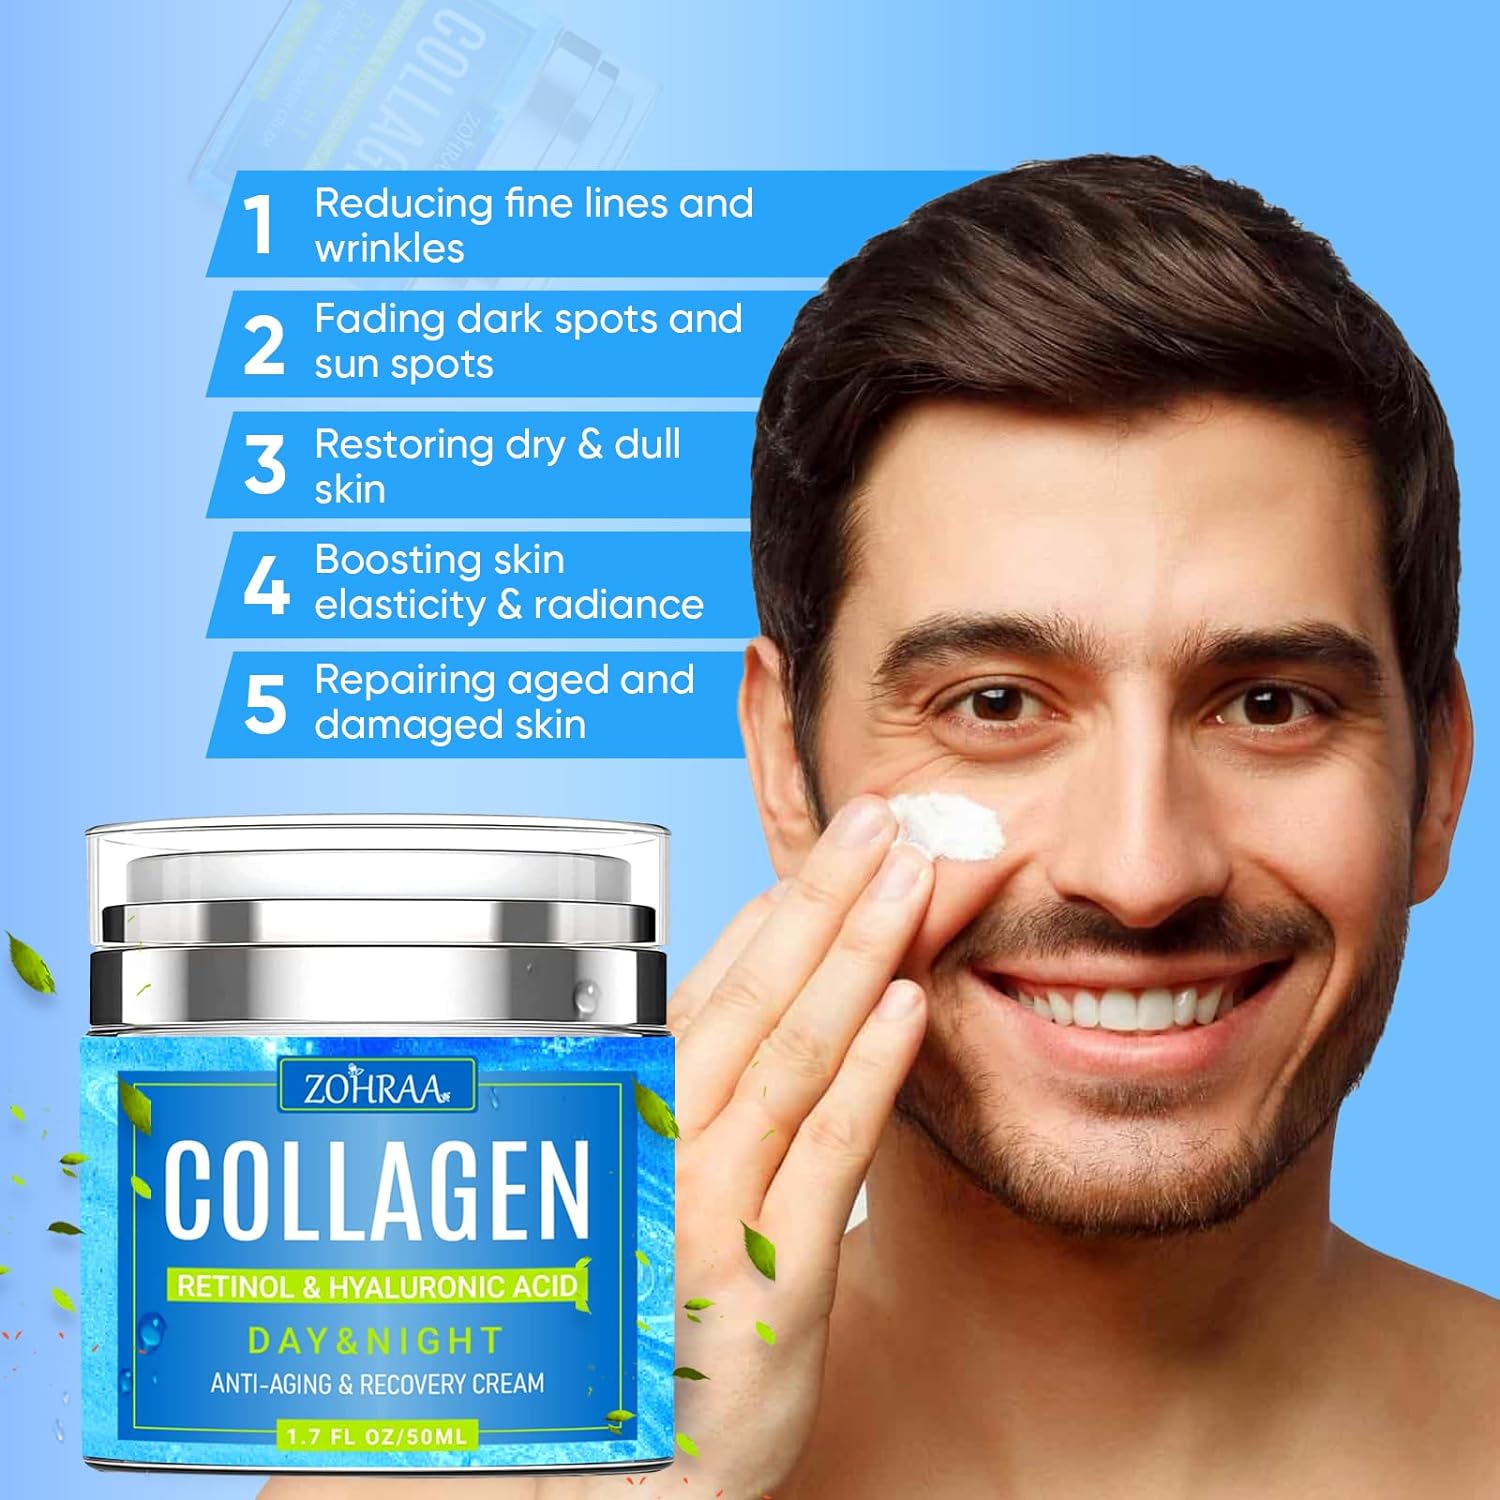 Face Moisturizer Collagen Cream - Anti Aging Neck and Décolleté Cream with Retinol  Hyaluronic Acid - Day  Night Face Cream to Smooth Wrinkles  Fine Lines - Anti Wrinkle Cream For Women and Men